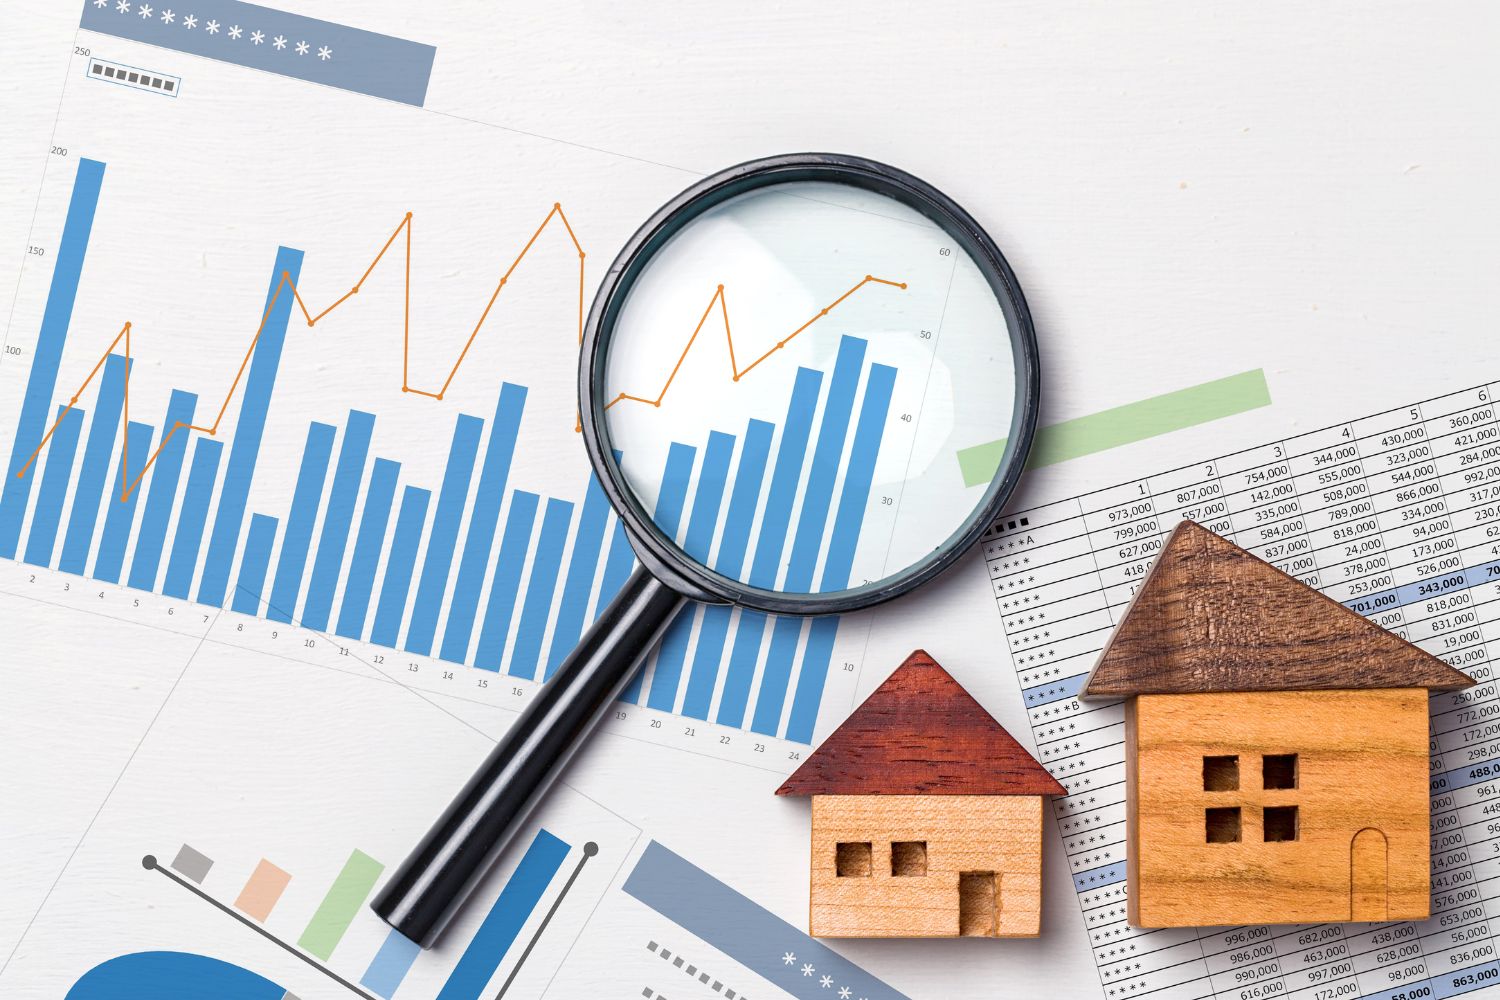 Making the most of property data for smarter real estate decisions